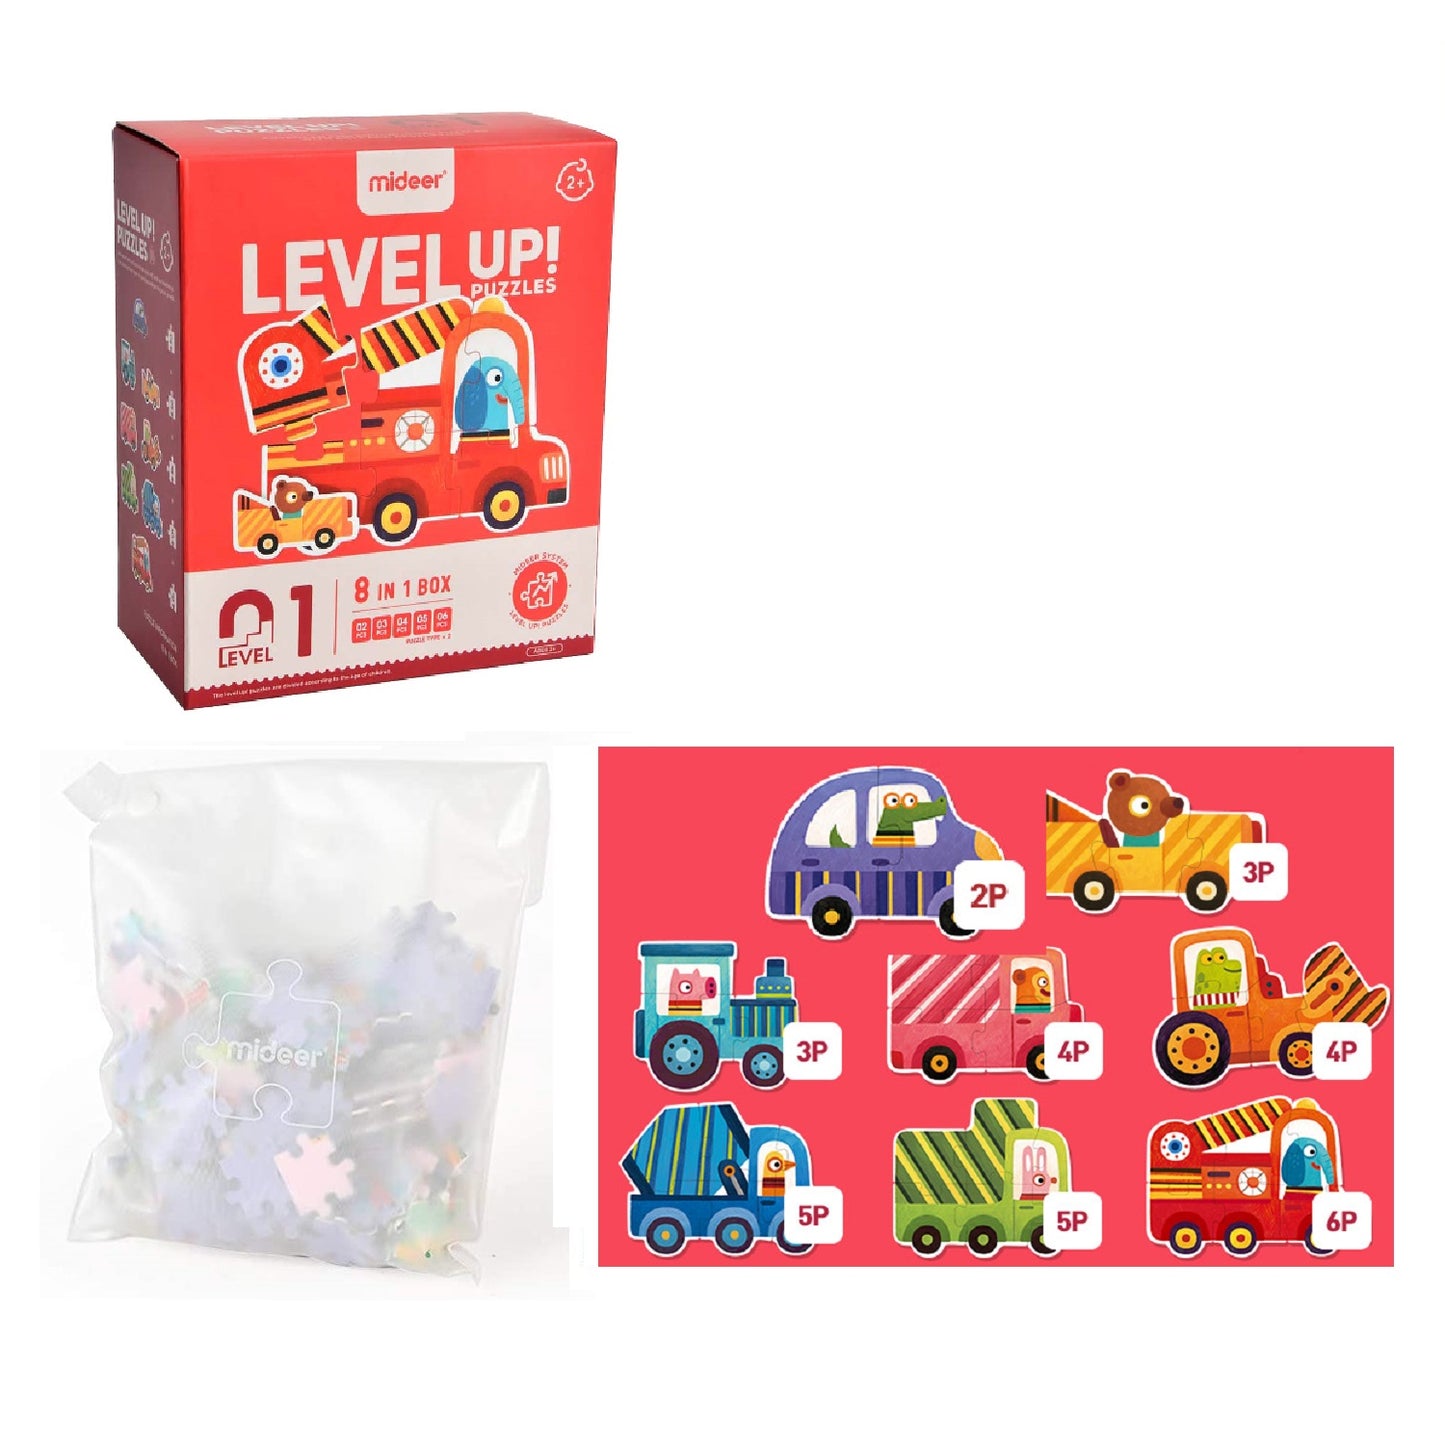 level-up-puzzles-nivel-1-vehiculos-8-puzzles